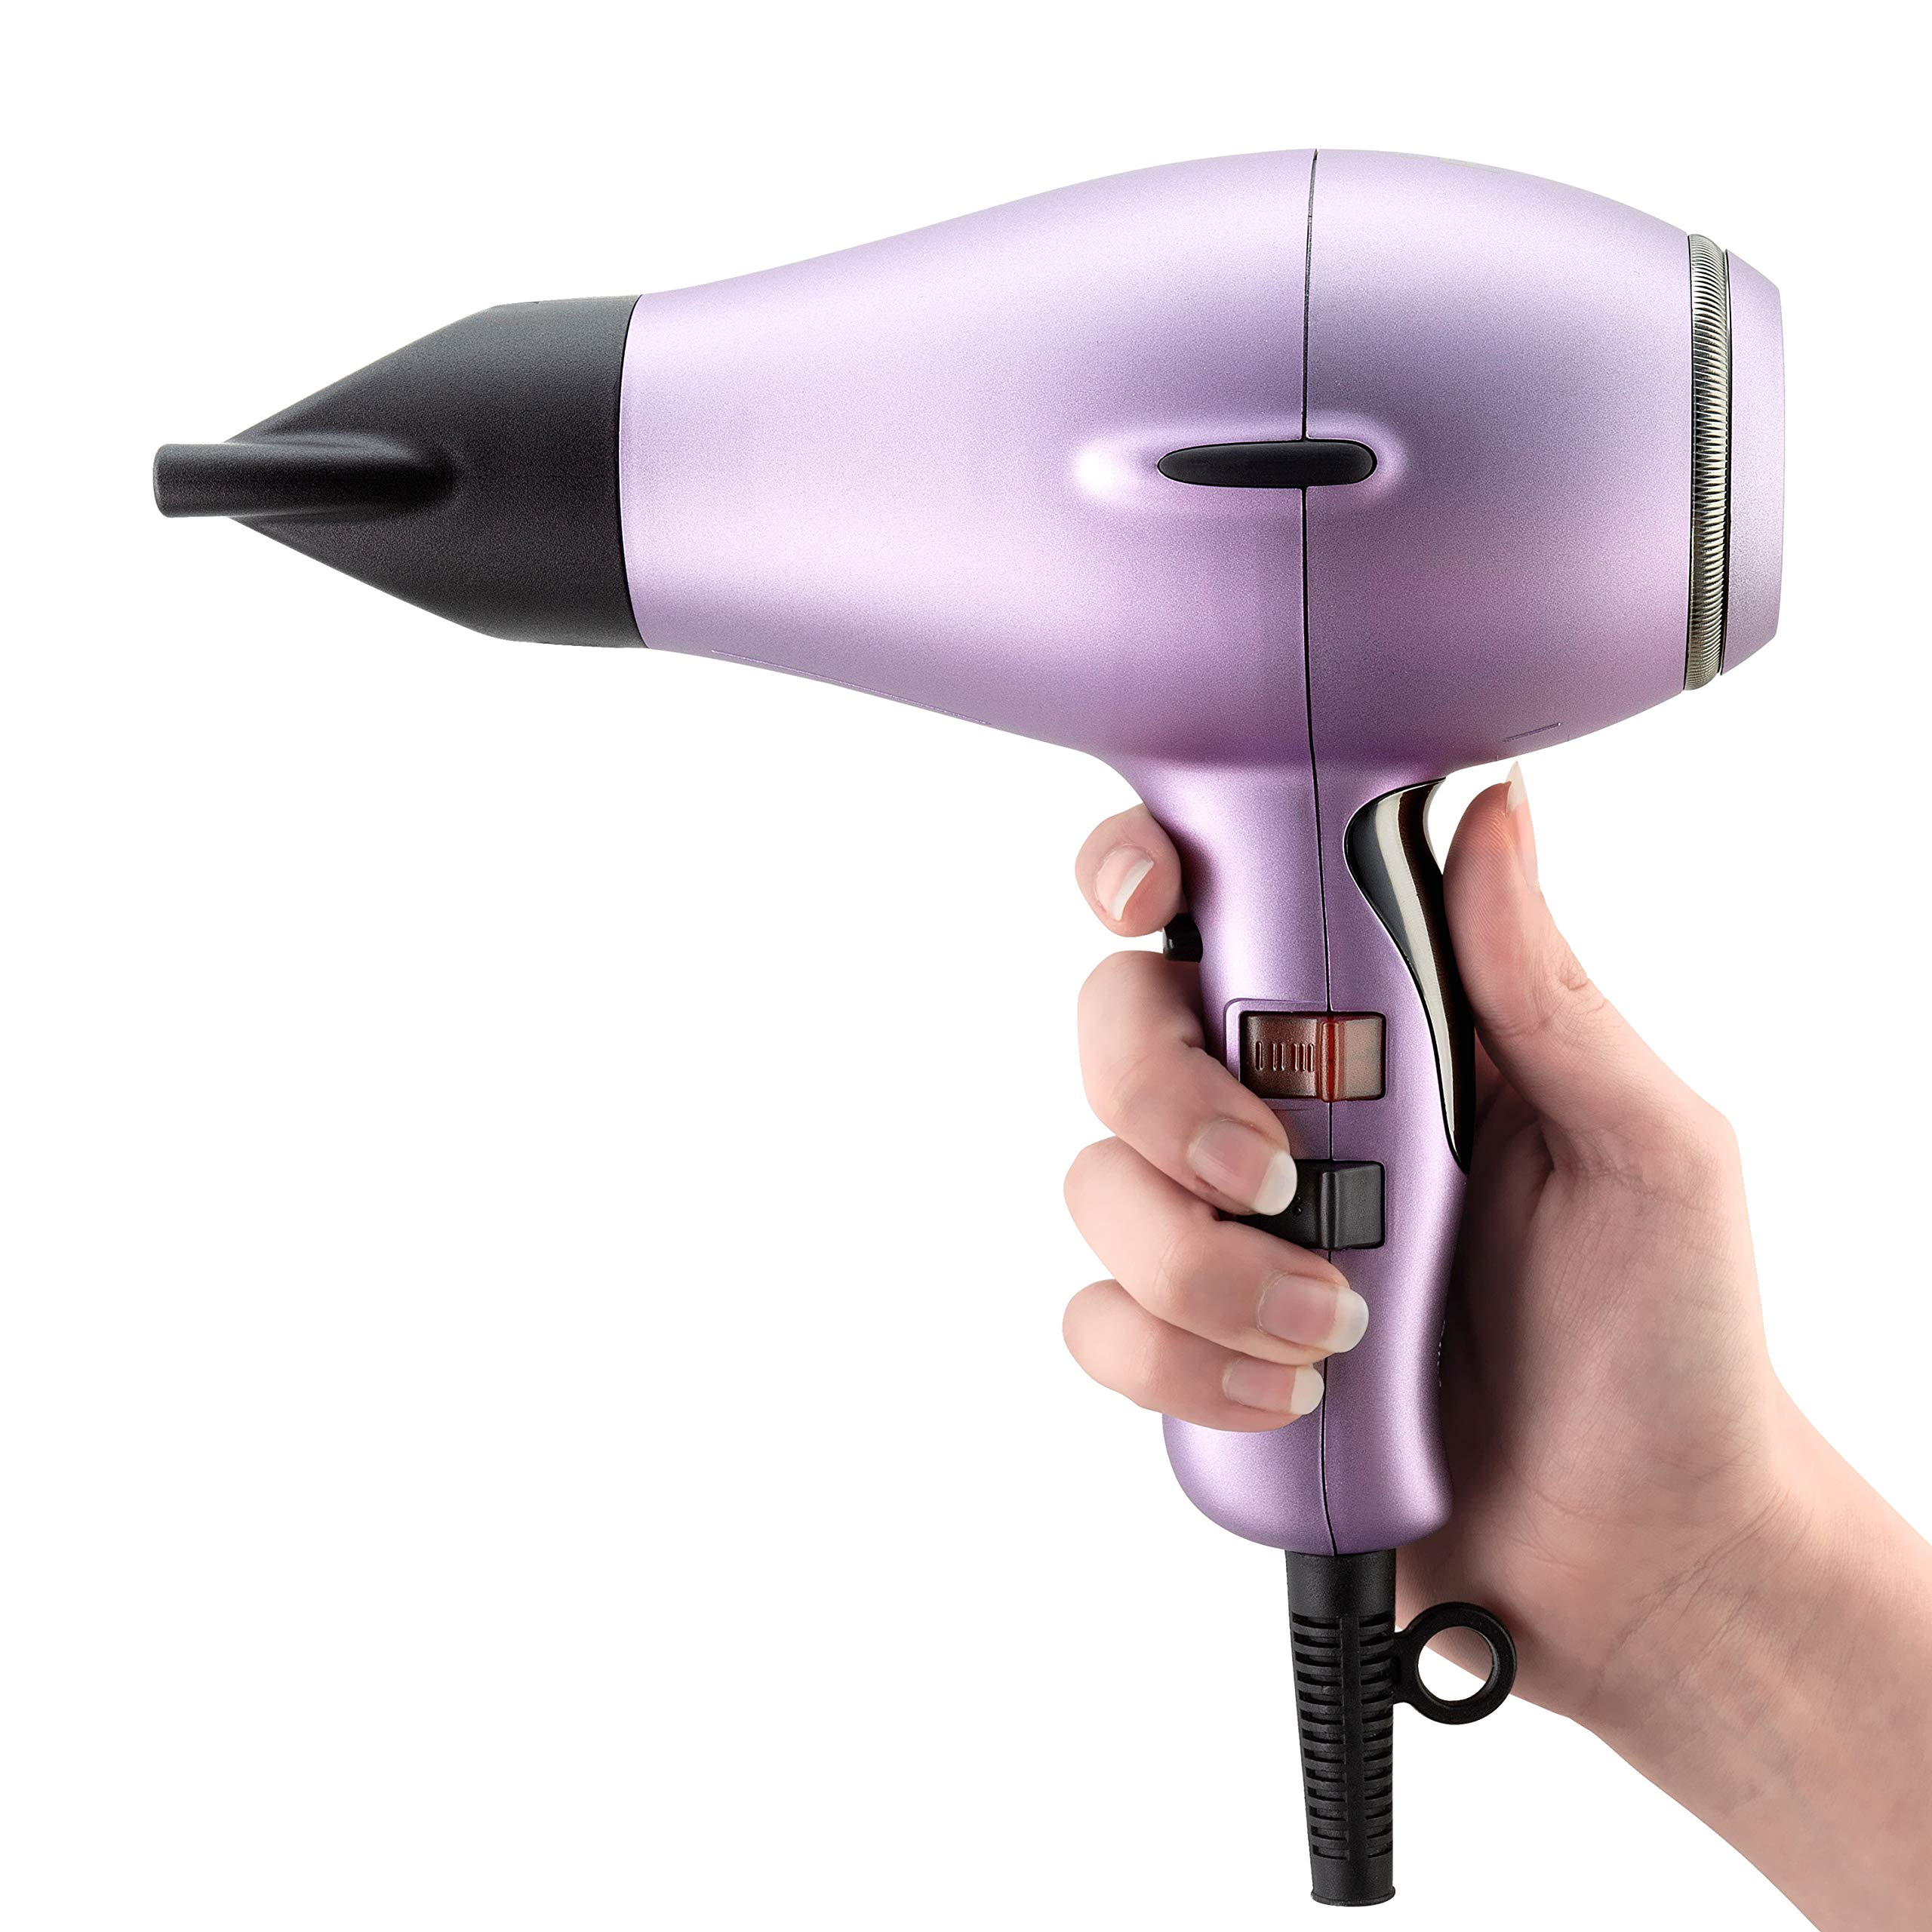 Elchim 8th Sense RUN: Professional Ultralight Hair Dryer, Fast Drying, Brushless Digitial Motor Technology, Multiple Colors, 2 Concentrators Included, Professional Blow Dryer